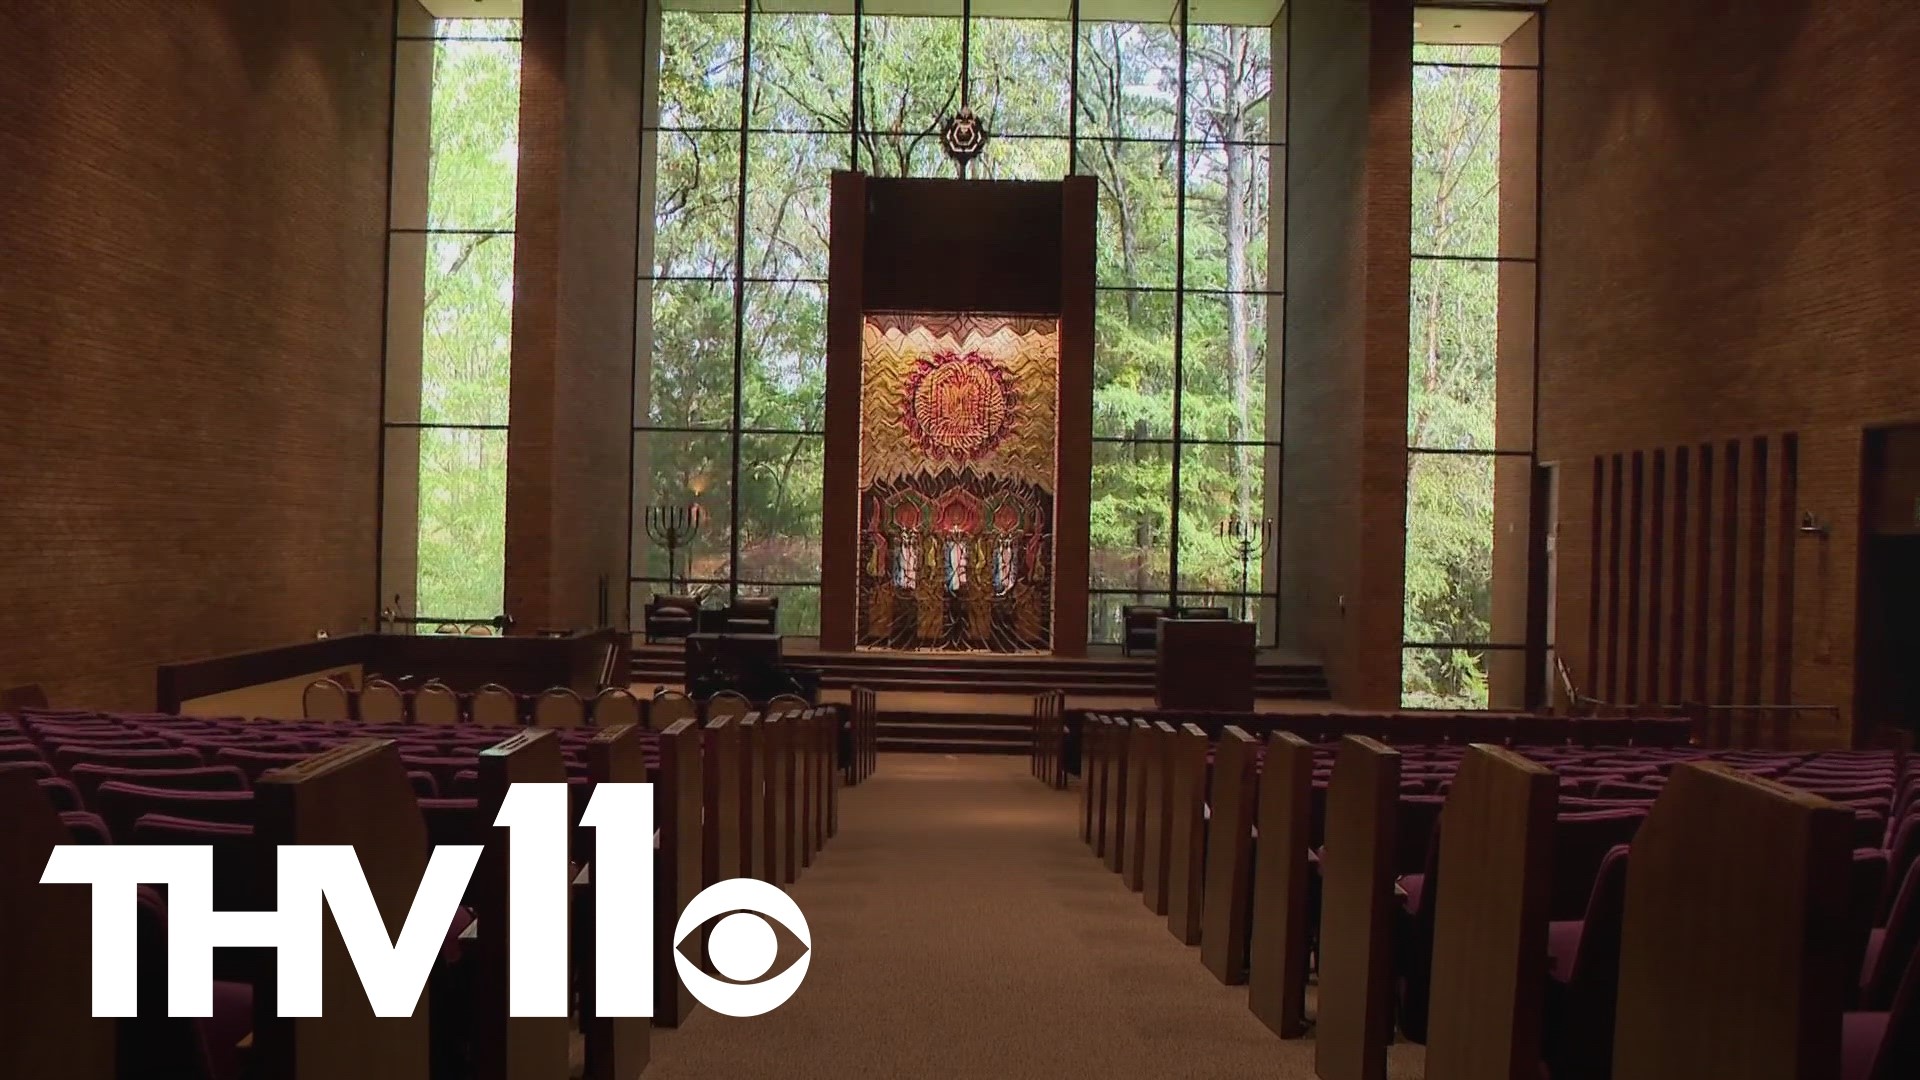 Money for tougher security measures is coming soon to six places of worship in Arkansas.